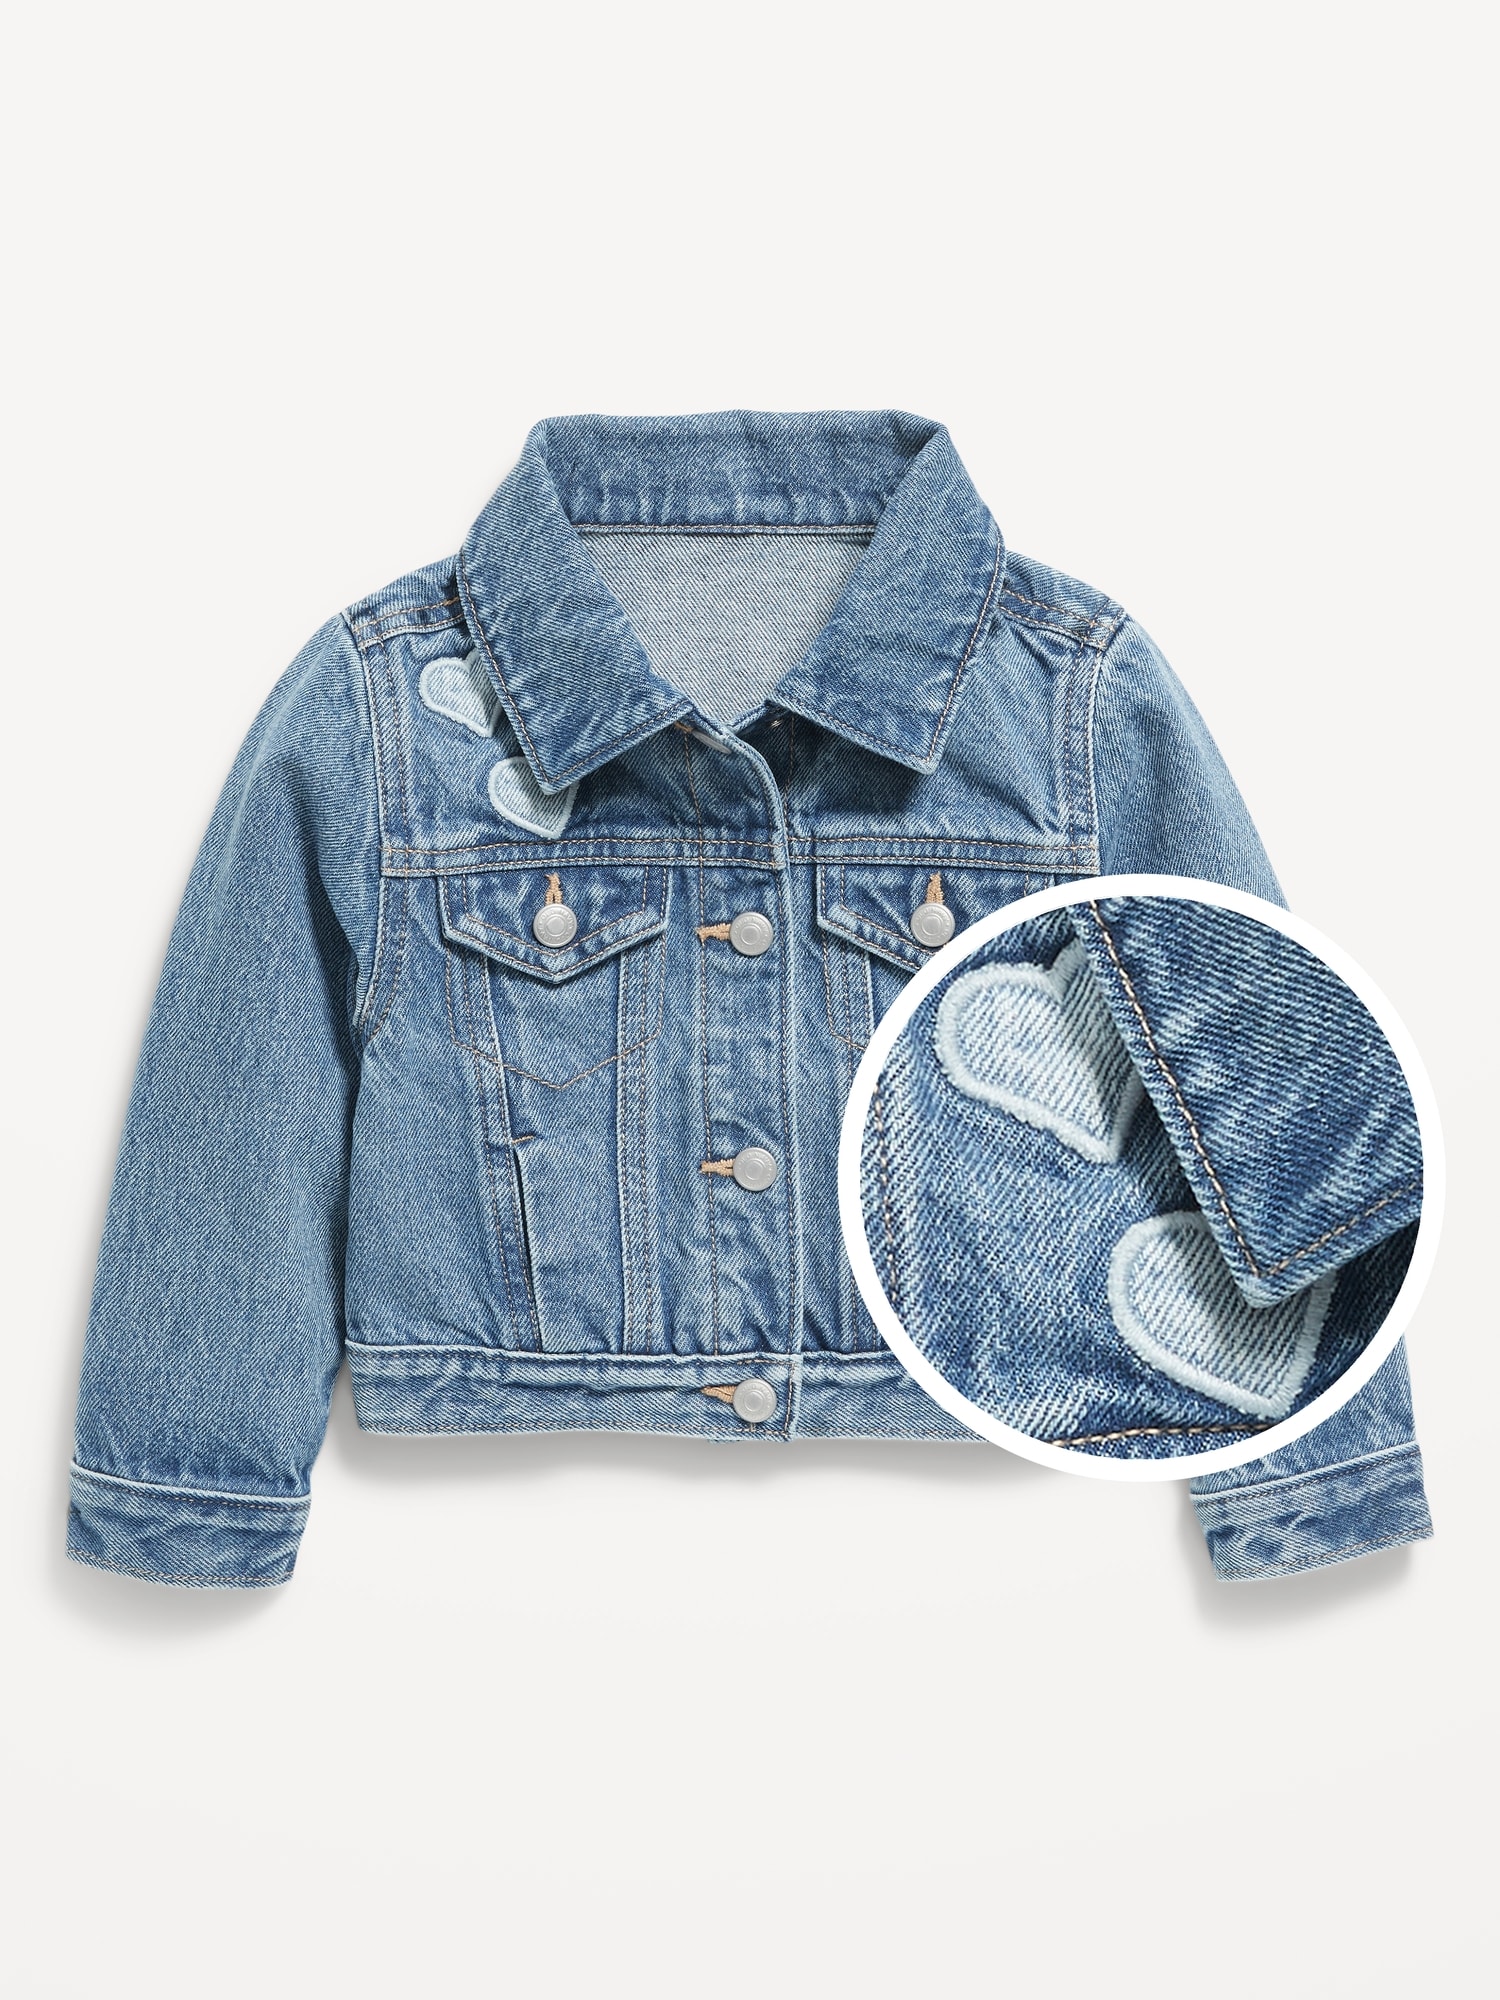 Embroidered Cropped Trucker Jean Jacket for Toddler Girls